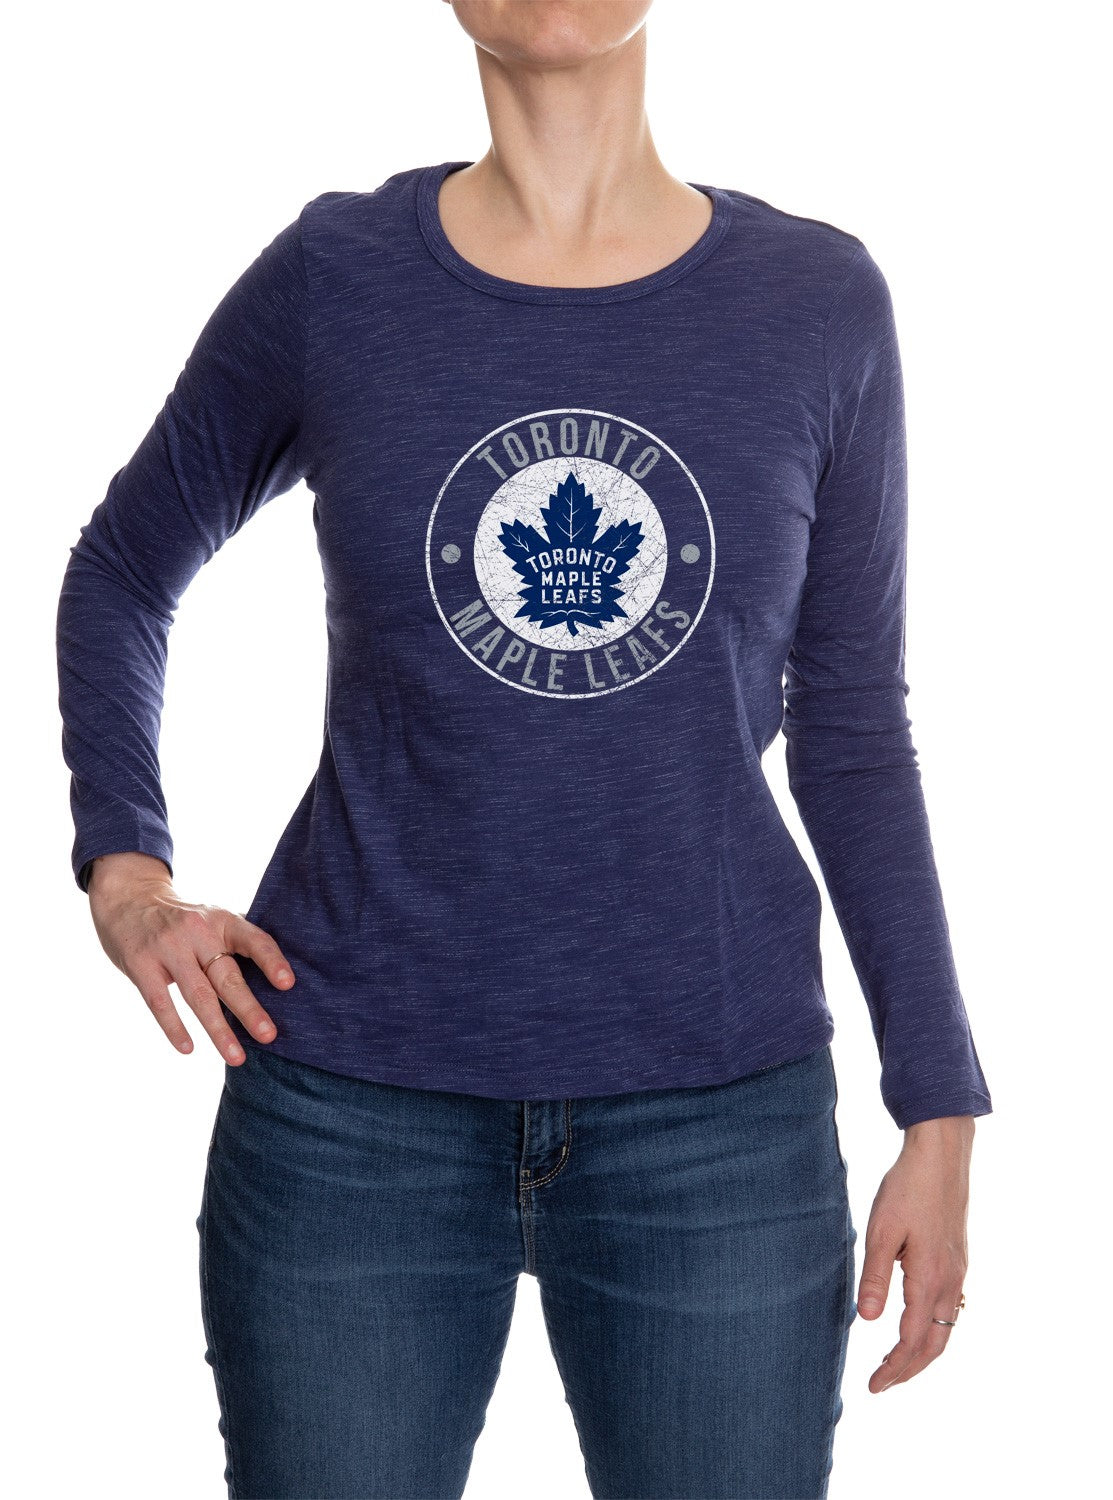 Toronto Maple Leafs Distressed Logo Long Sleeve Shirt for Women in Blue Front View